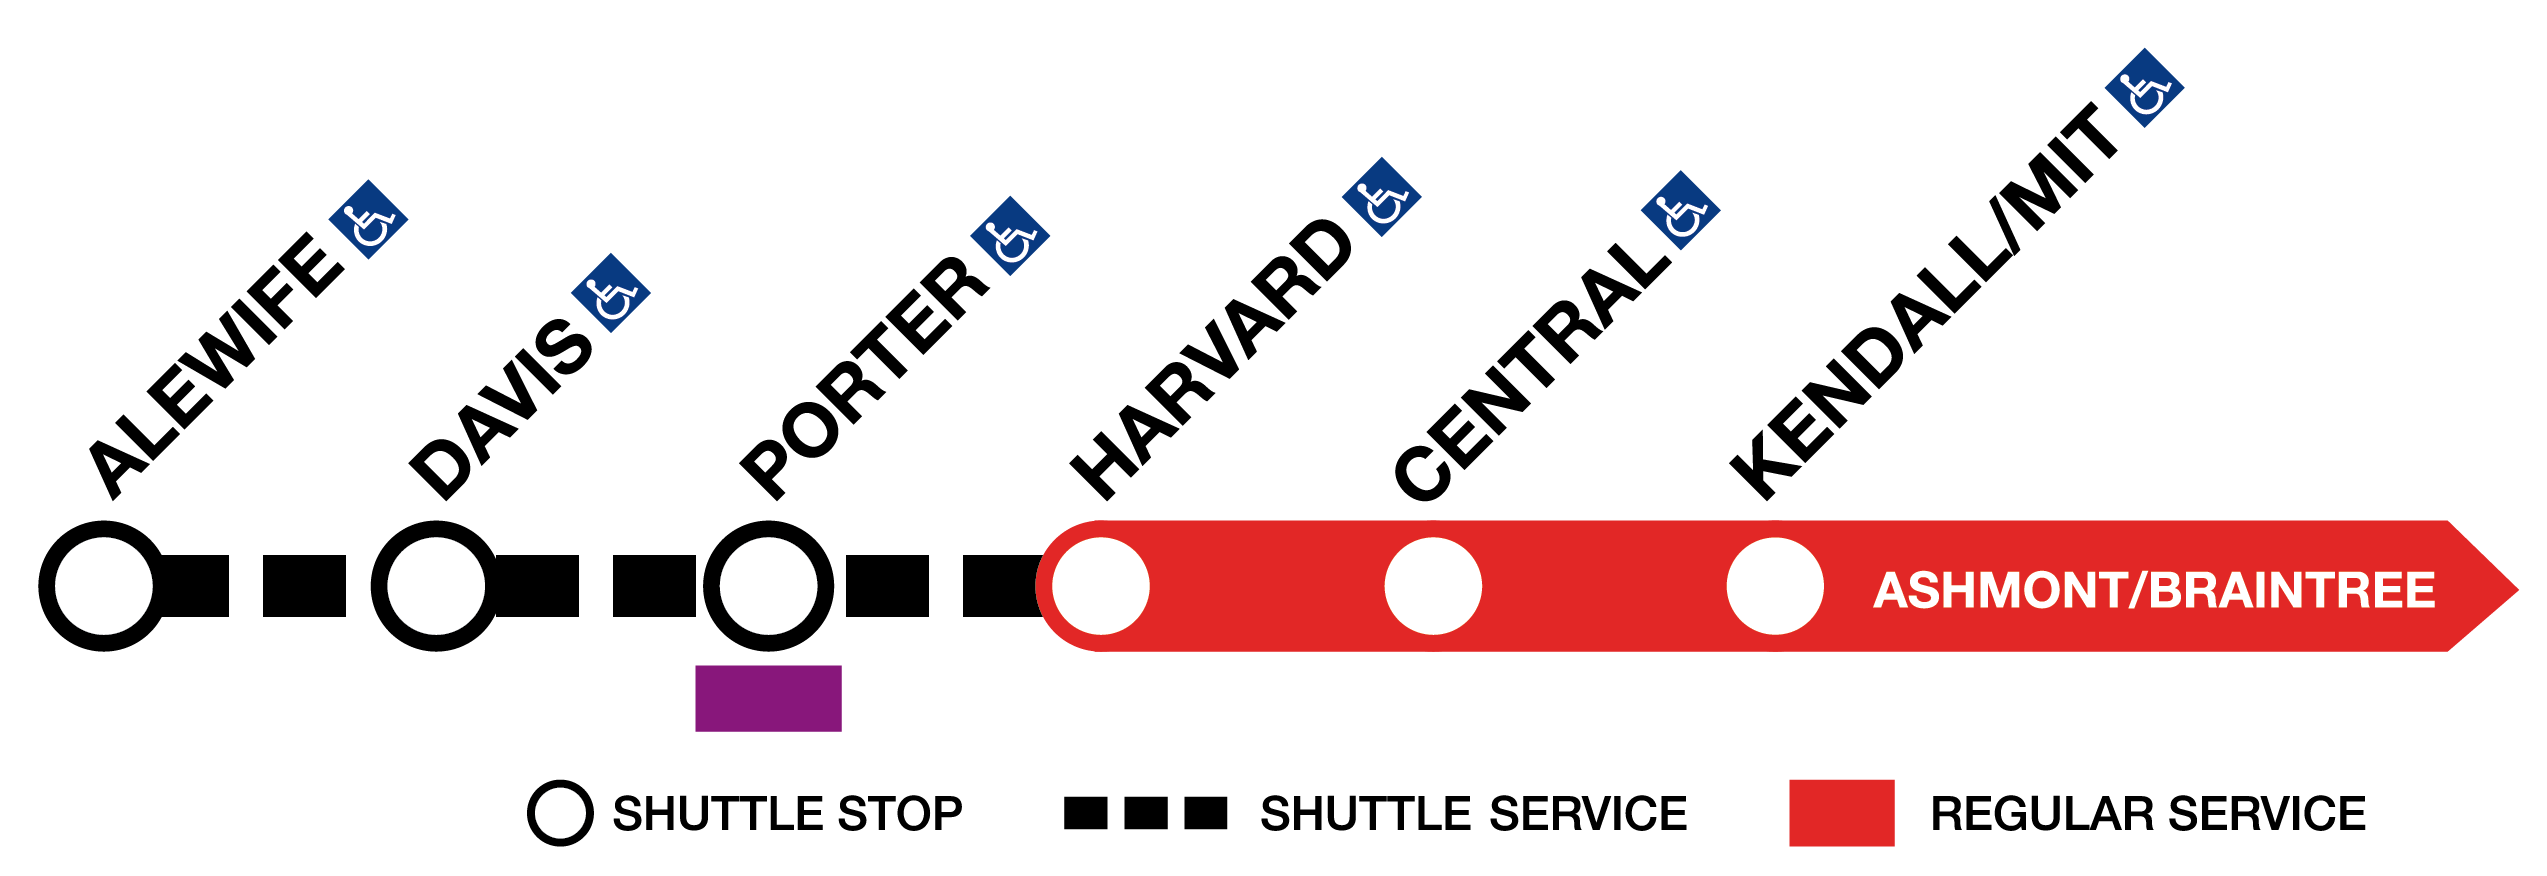 Shuttle service graphic for the Red Line closure